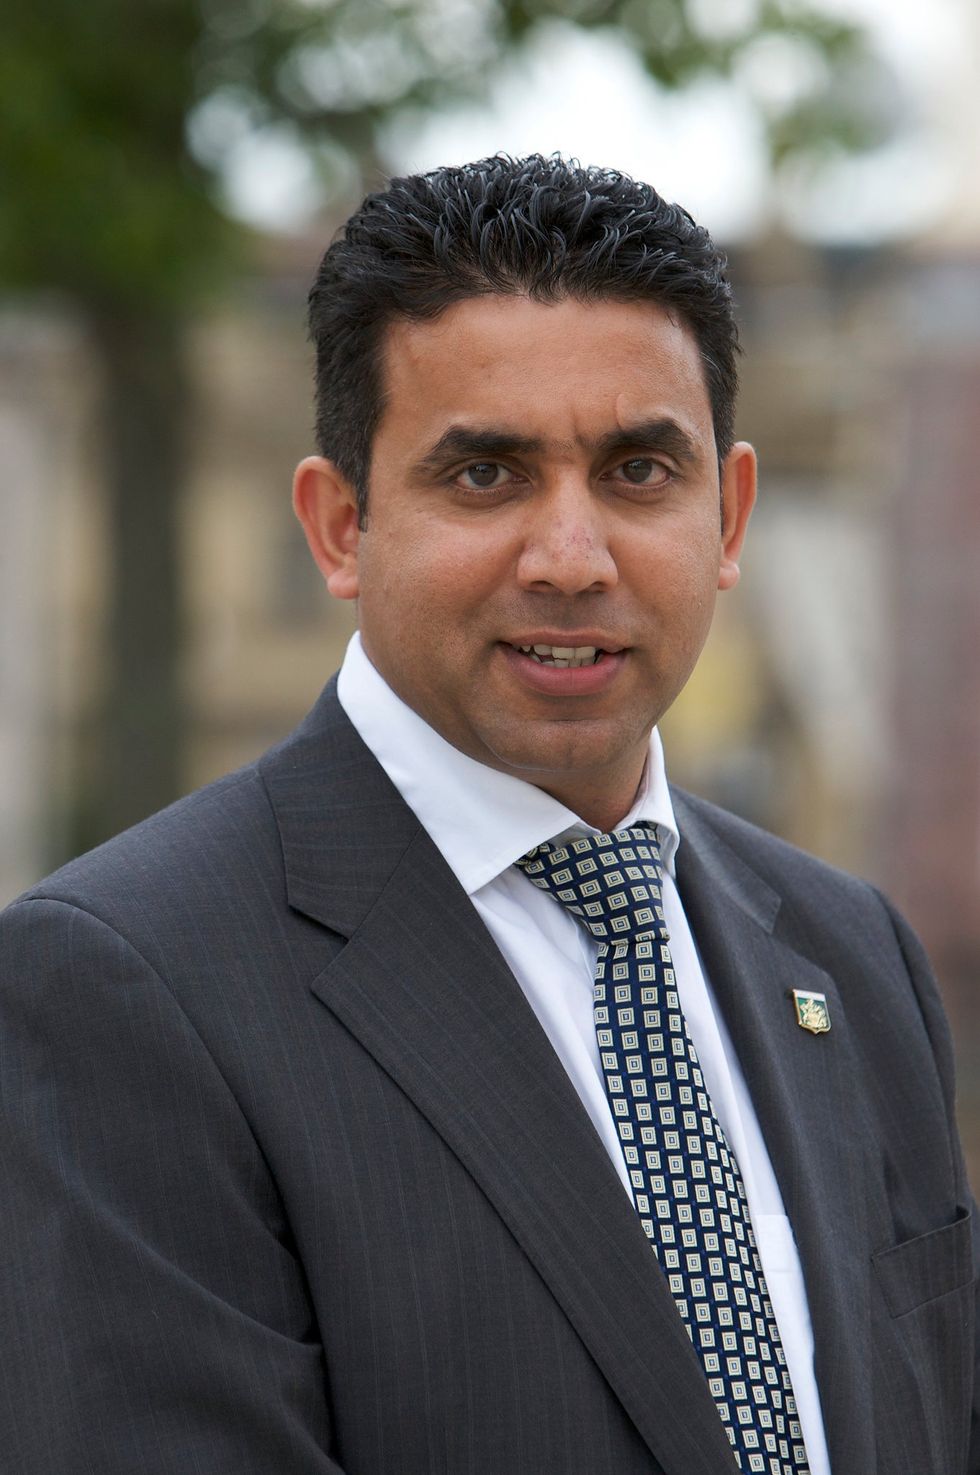 Mahroof Hussain was embroiled in the Rotherham grooming gangs scandal in 2015